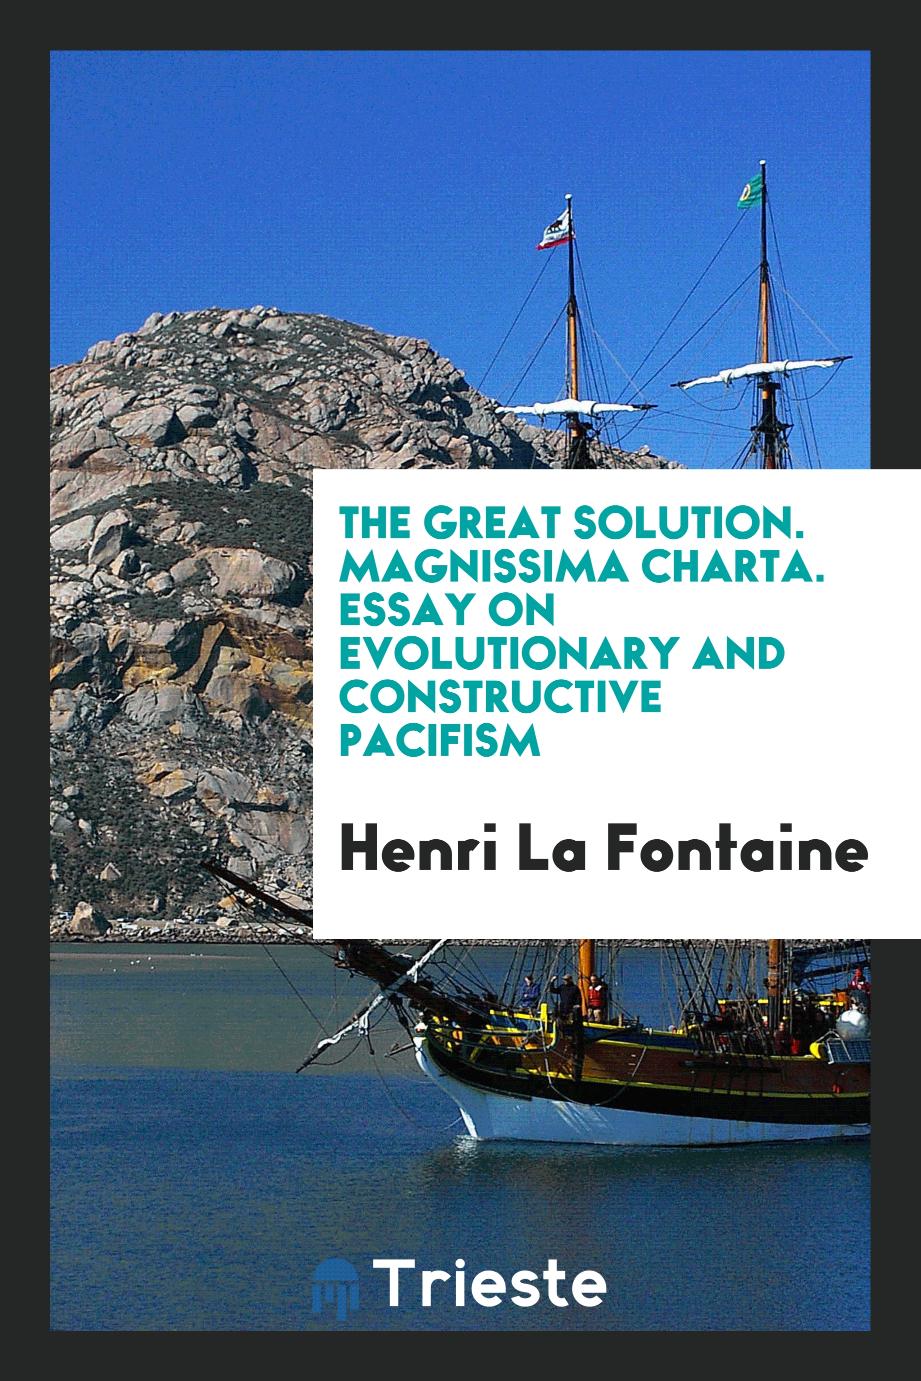 The Great Solution. Magnissima Charta. Essay on Evolutionary and Constructive Pacifism